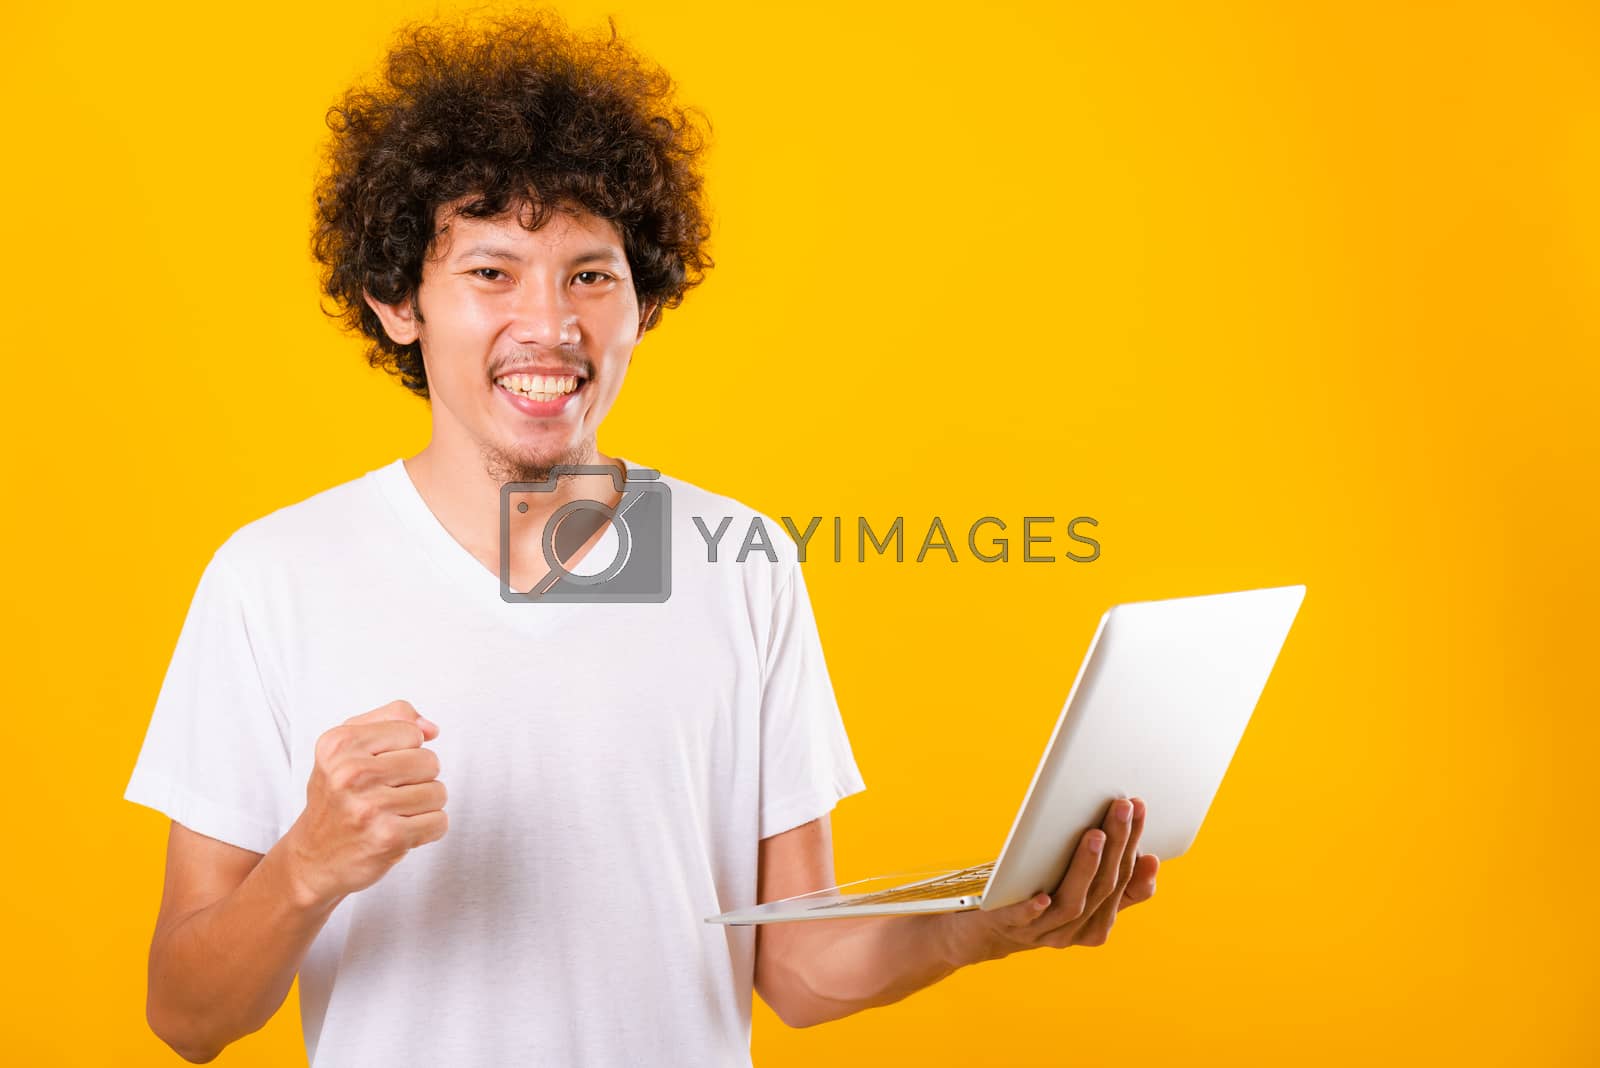 Royalty free image of Asian handsome man with curly hair using laptop computer isolate by Sorapop